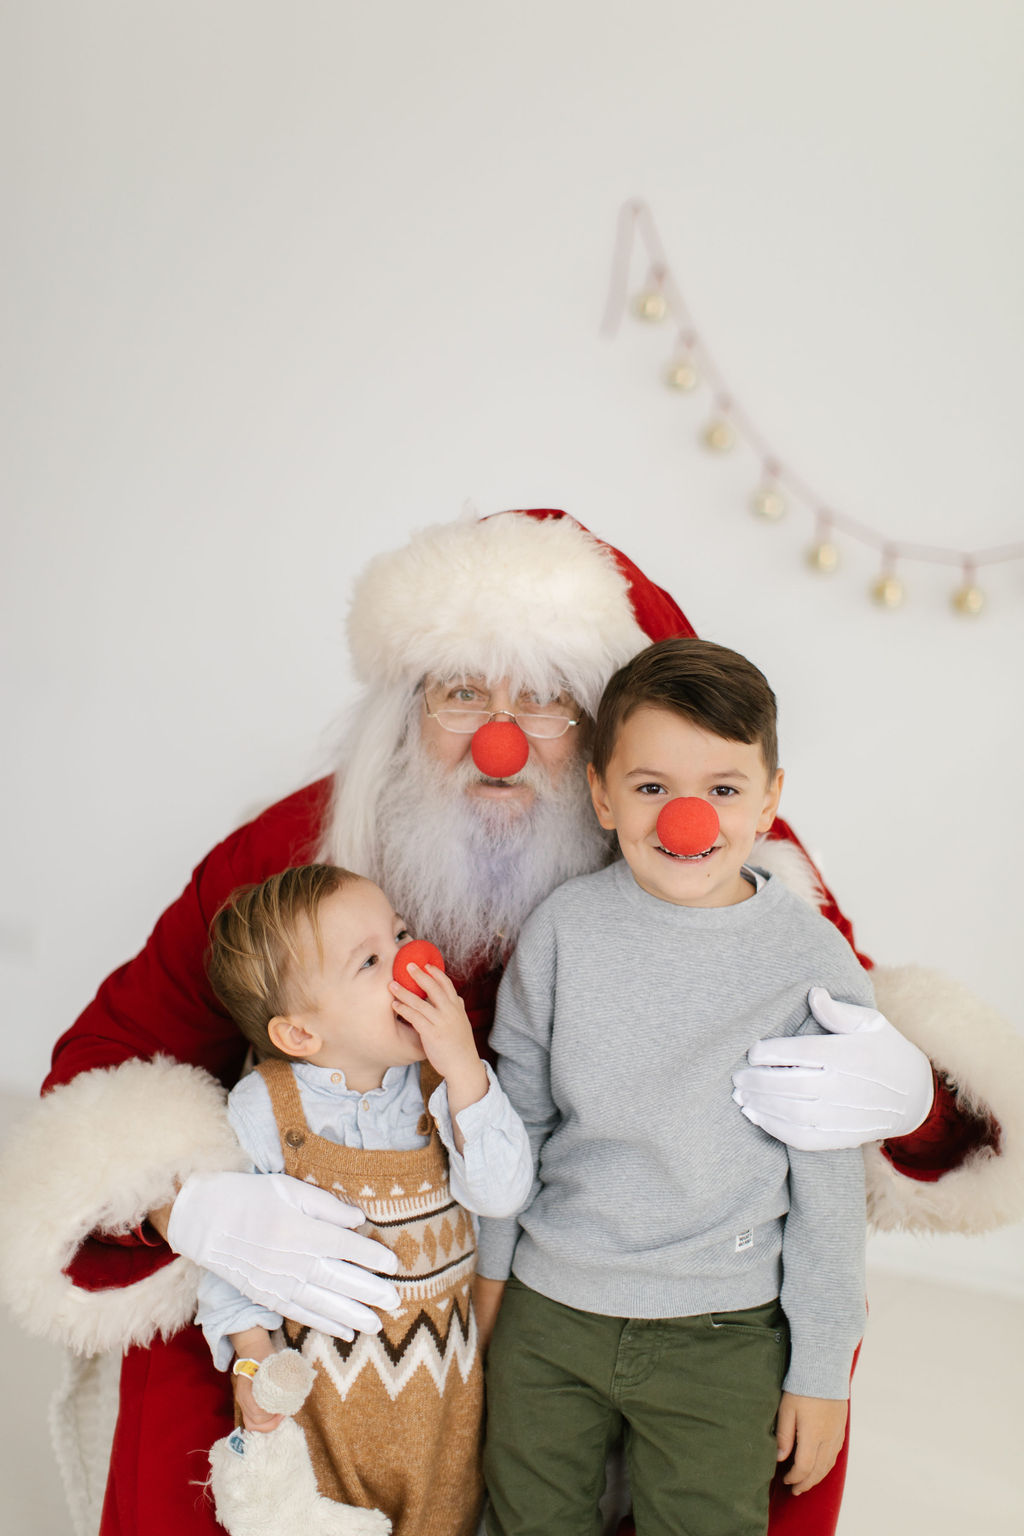 Santa playing with kids and dressing up as Rudolph during mini session